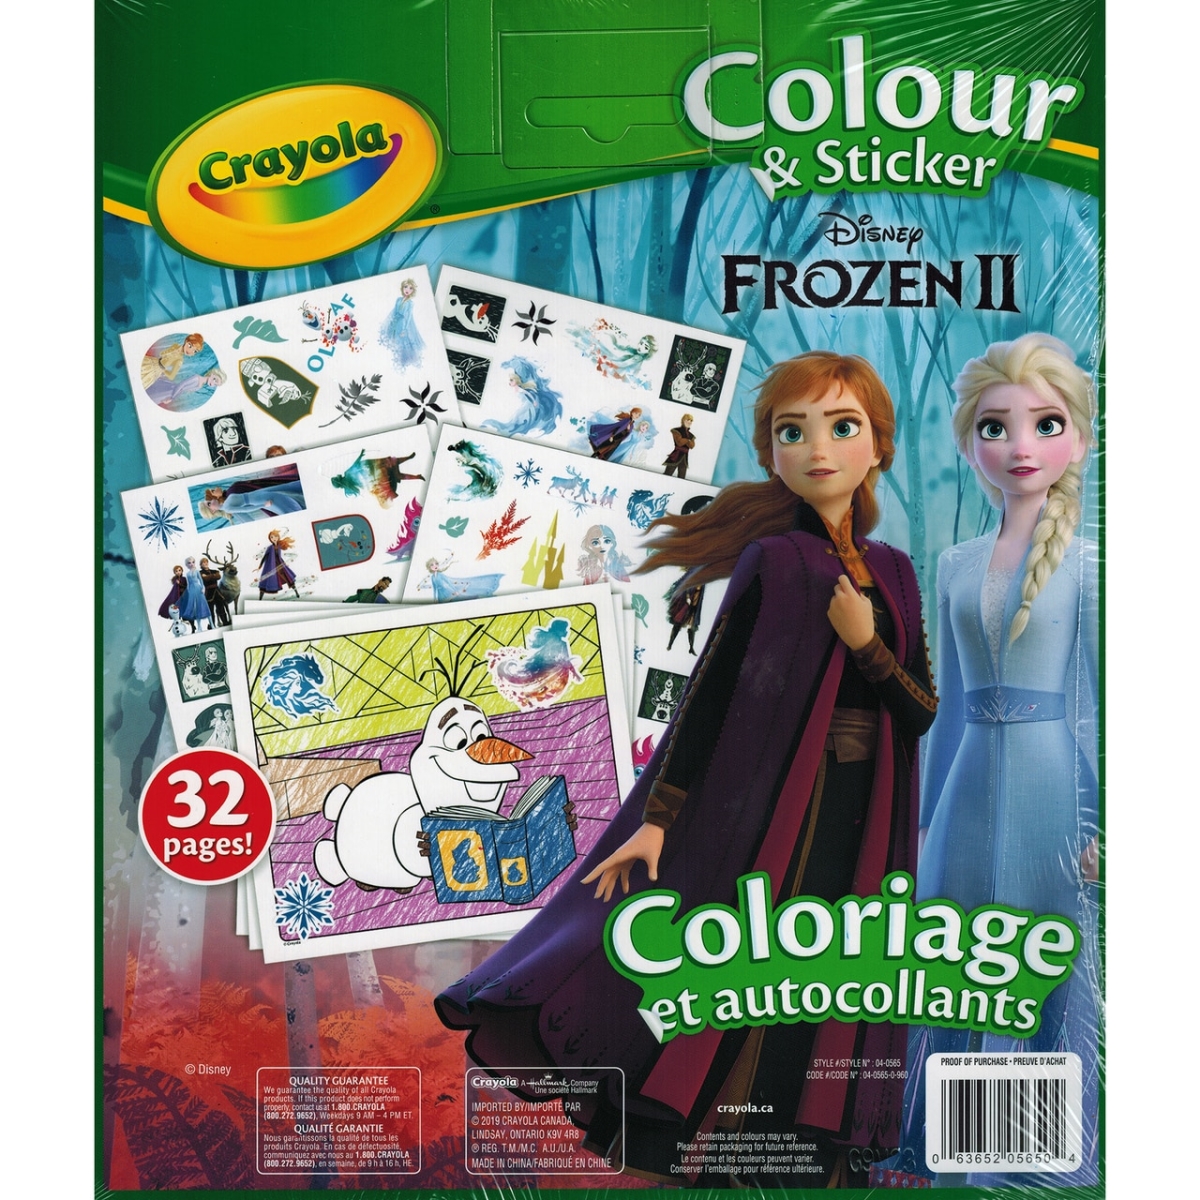 Crayola 30372790 Disney Frozen Ii Color & Sticker Book - 50 Stickers - 32 Pages